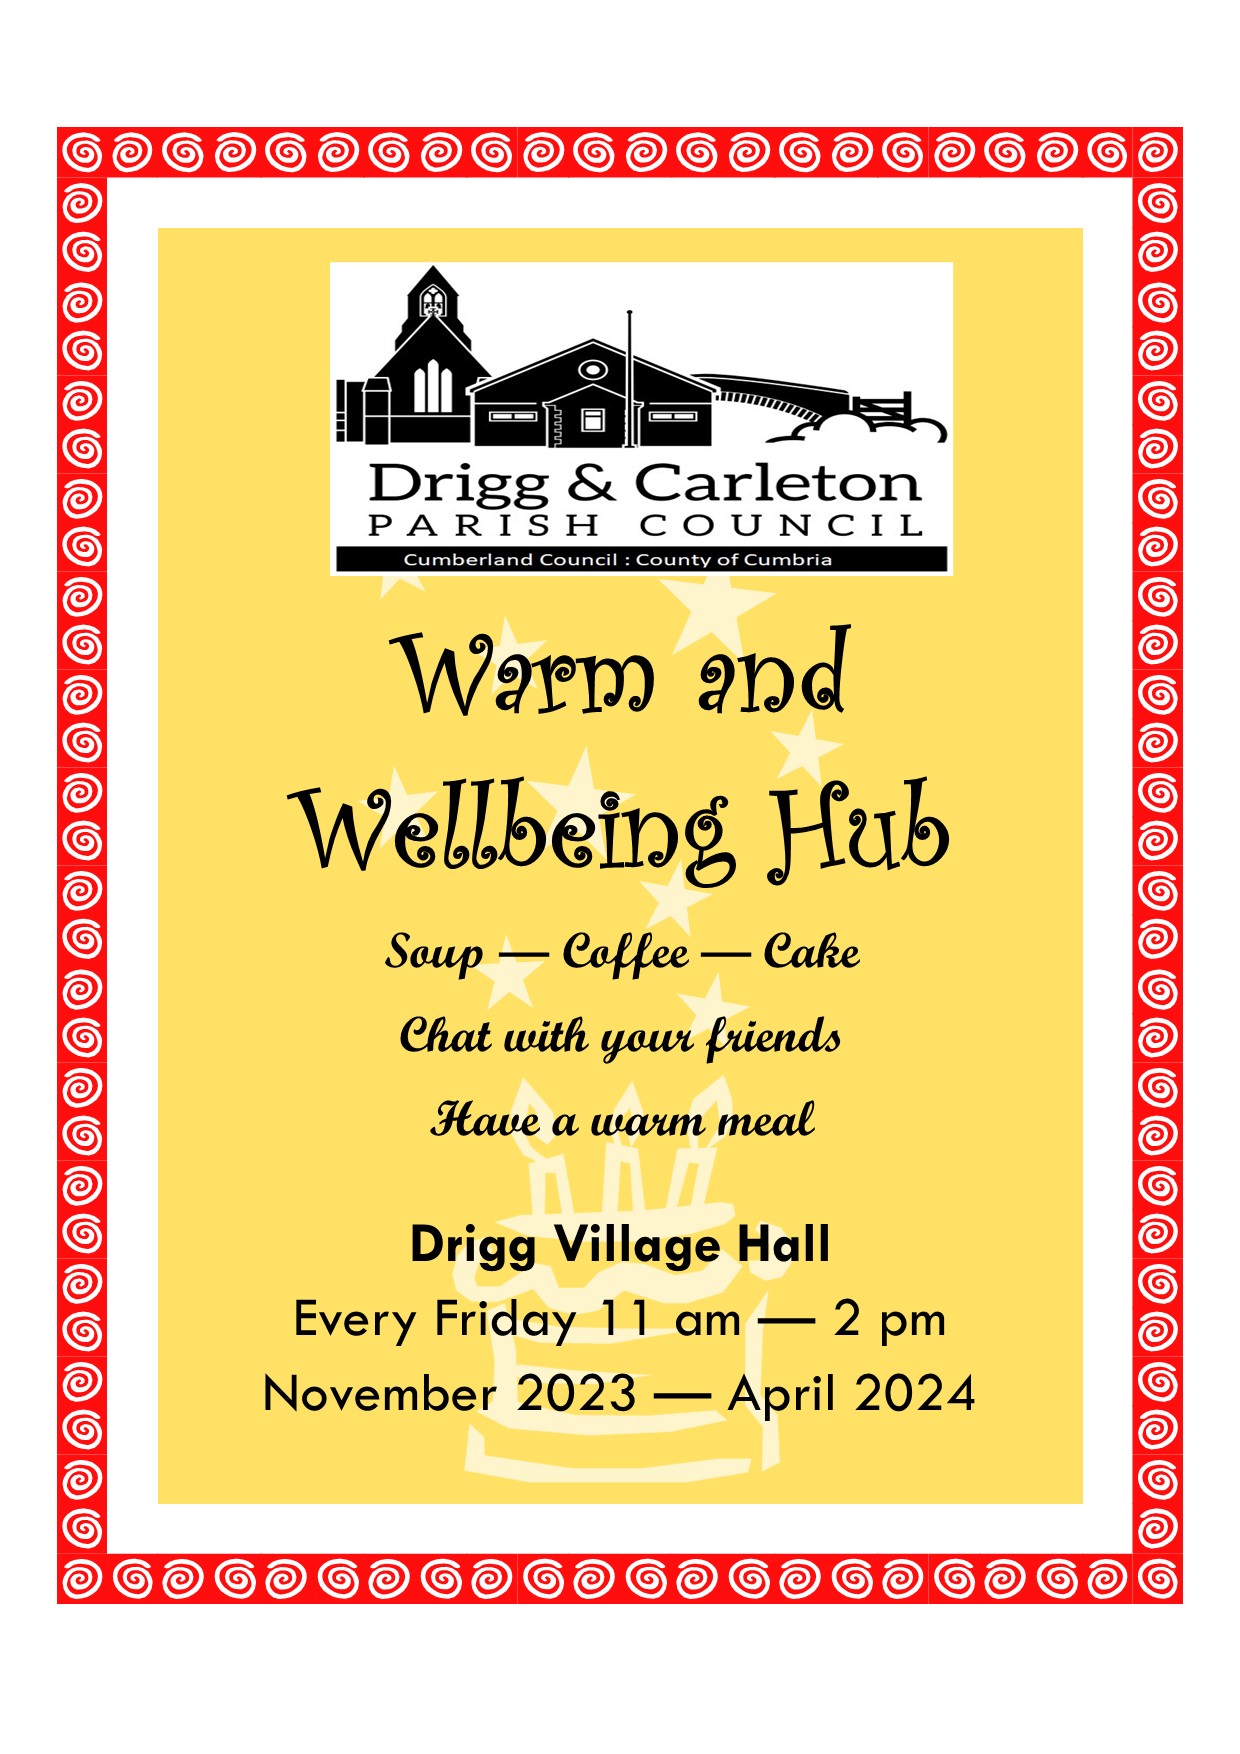 Warm and Wellbeing Hub – 19th April 2024